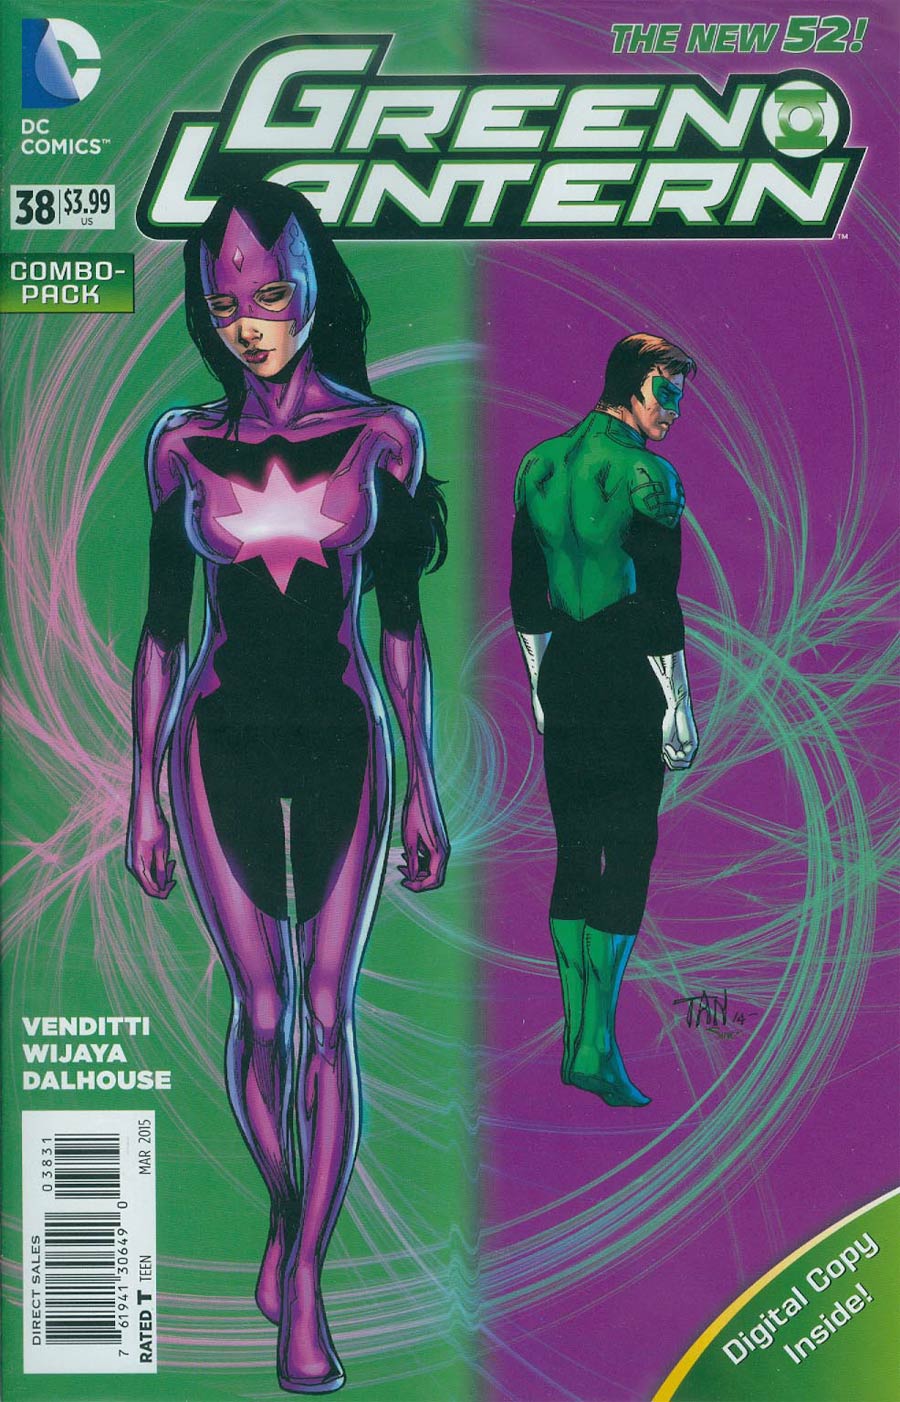 Green Lantern Vol 5 #38 Cover D Combo Pack Without Polybag